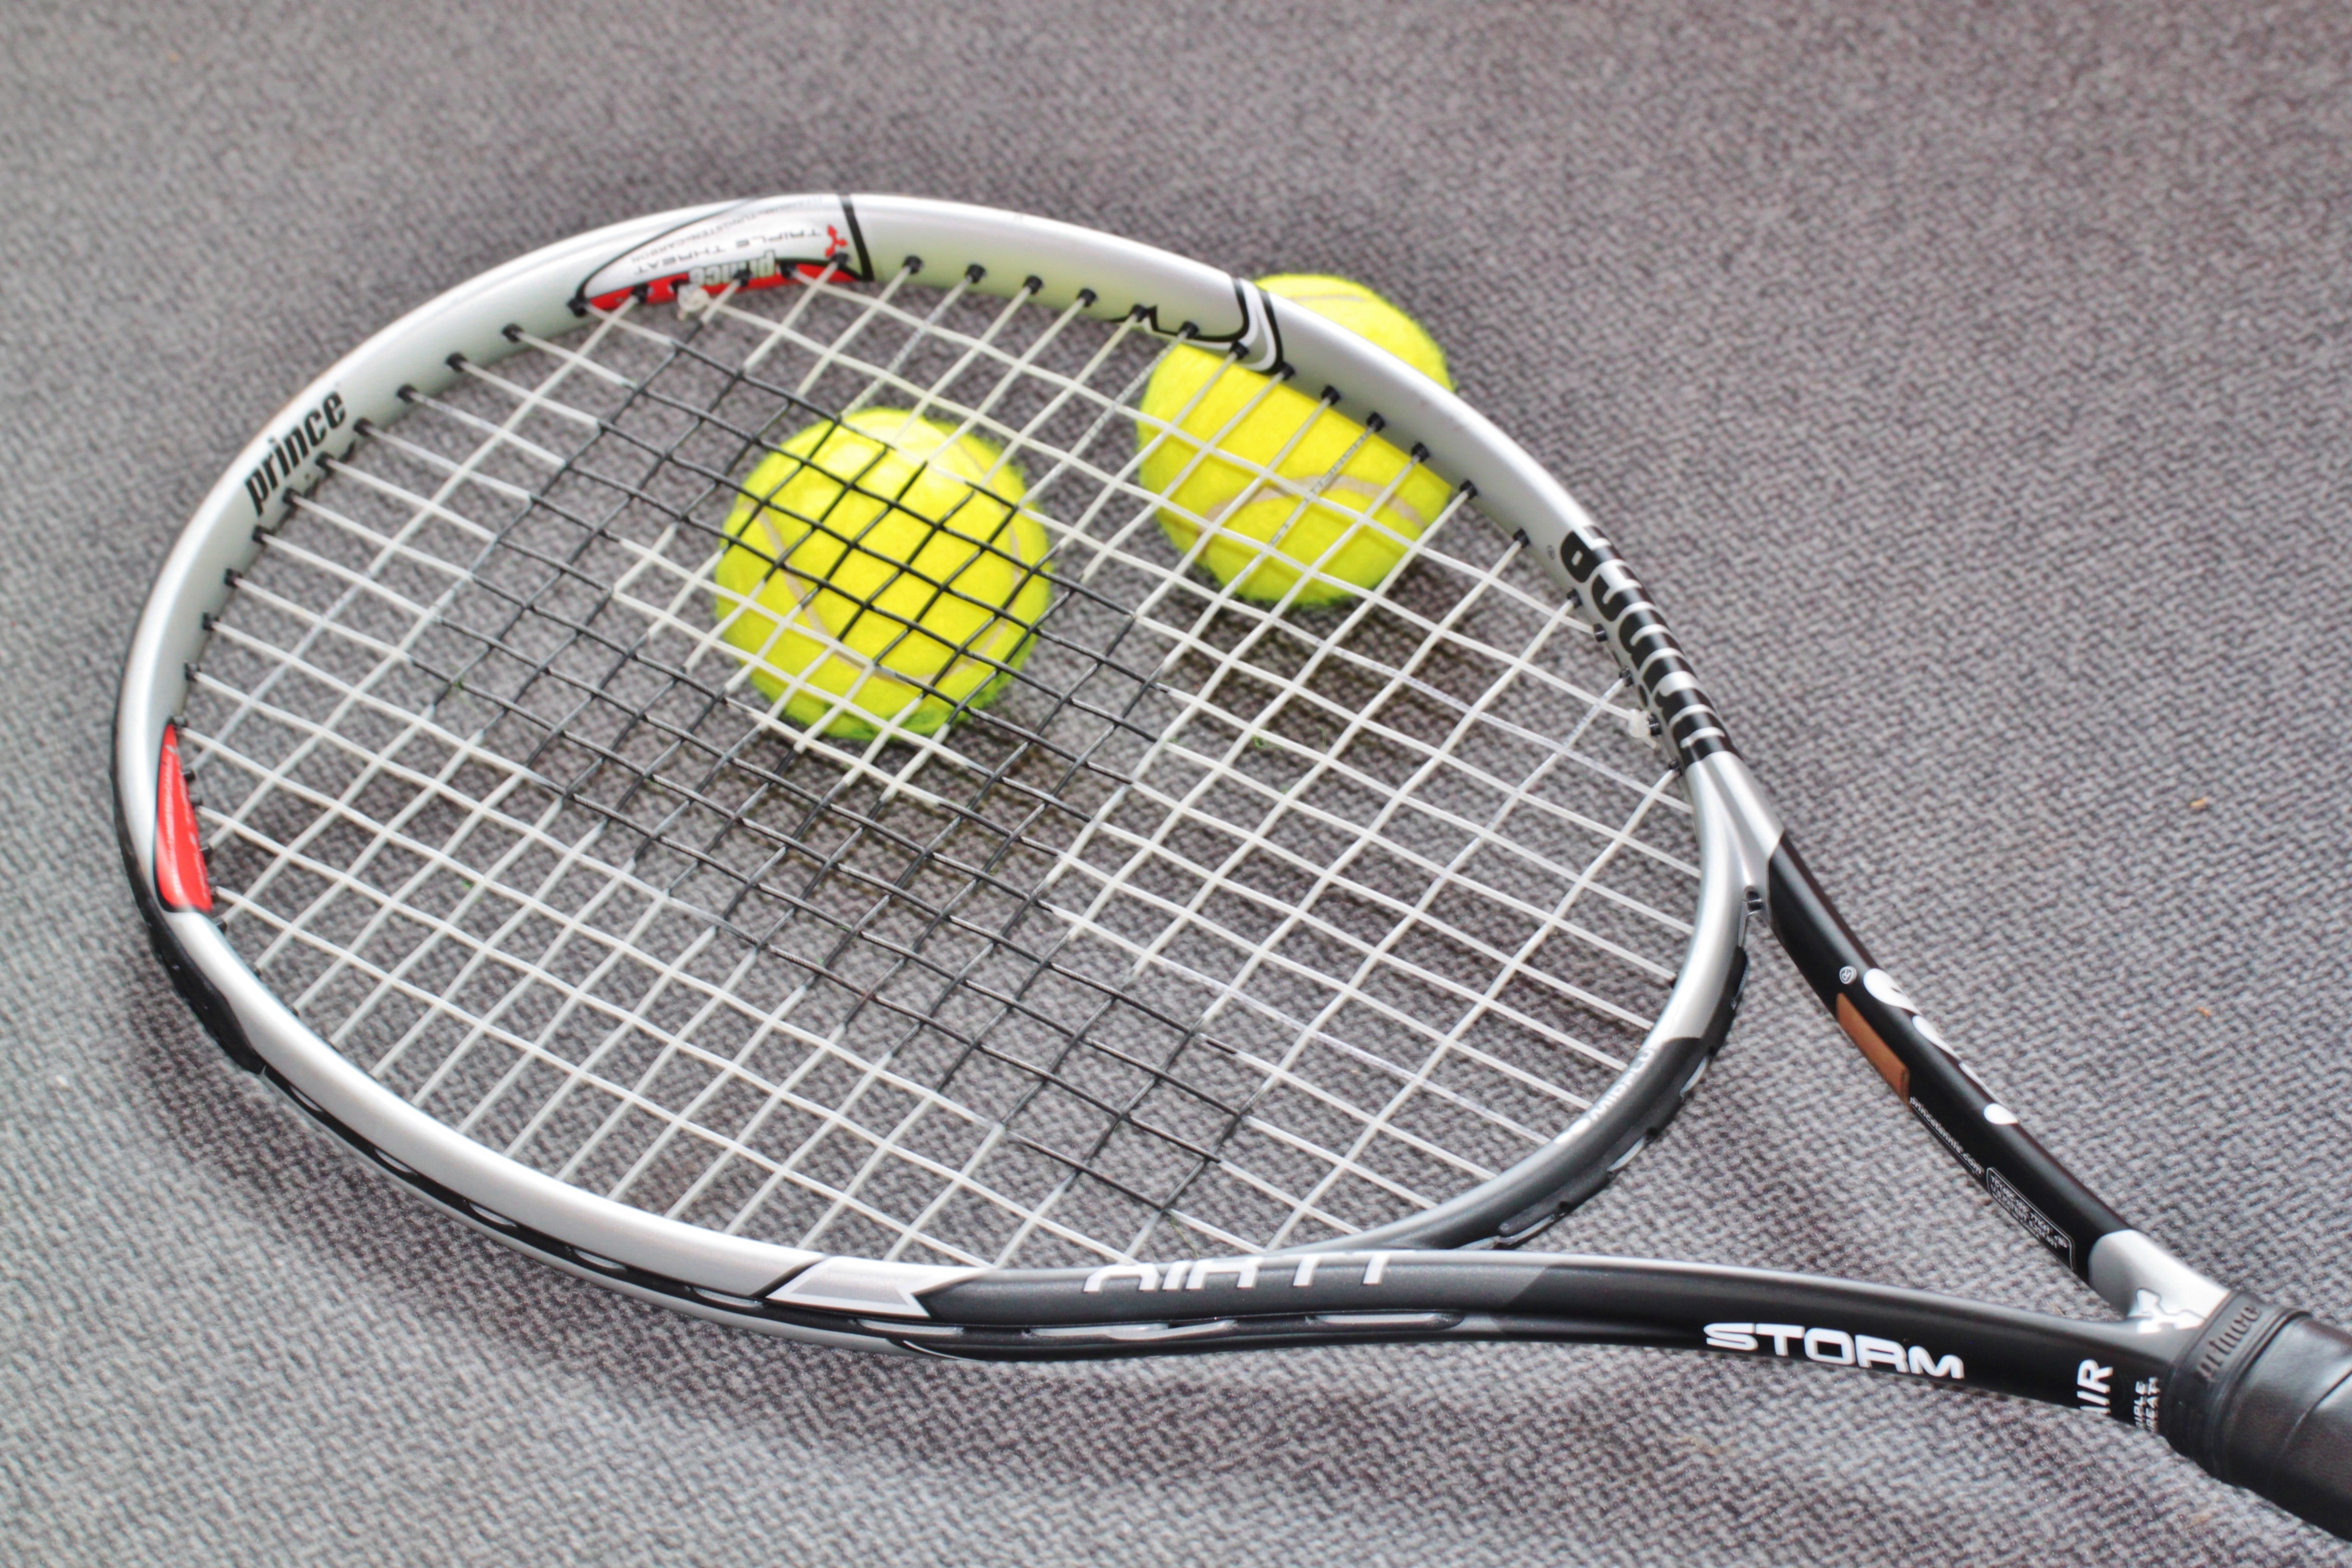 black and white storm tennis racket